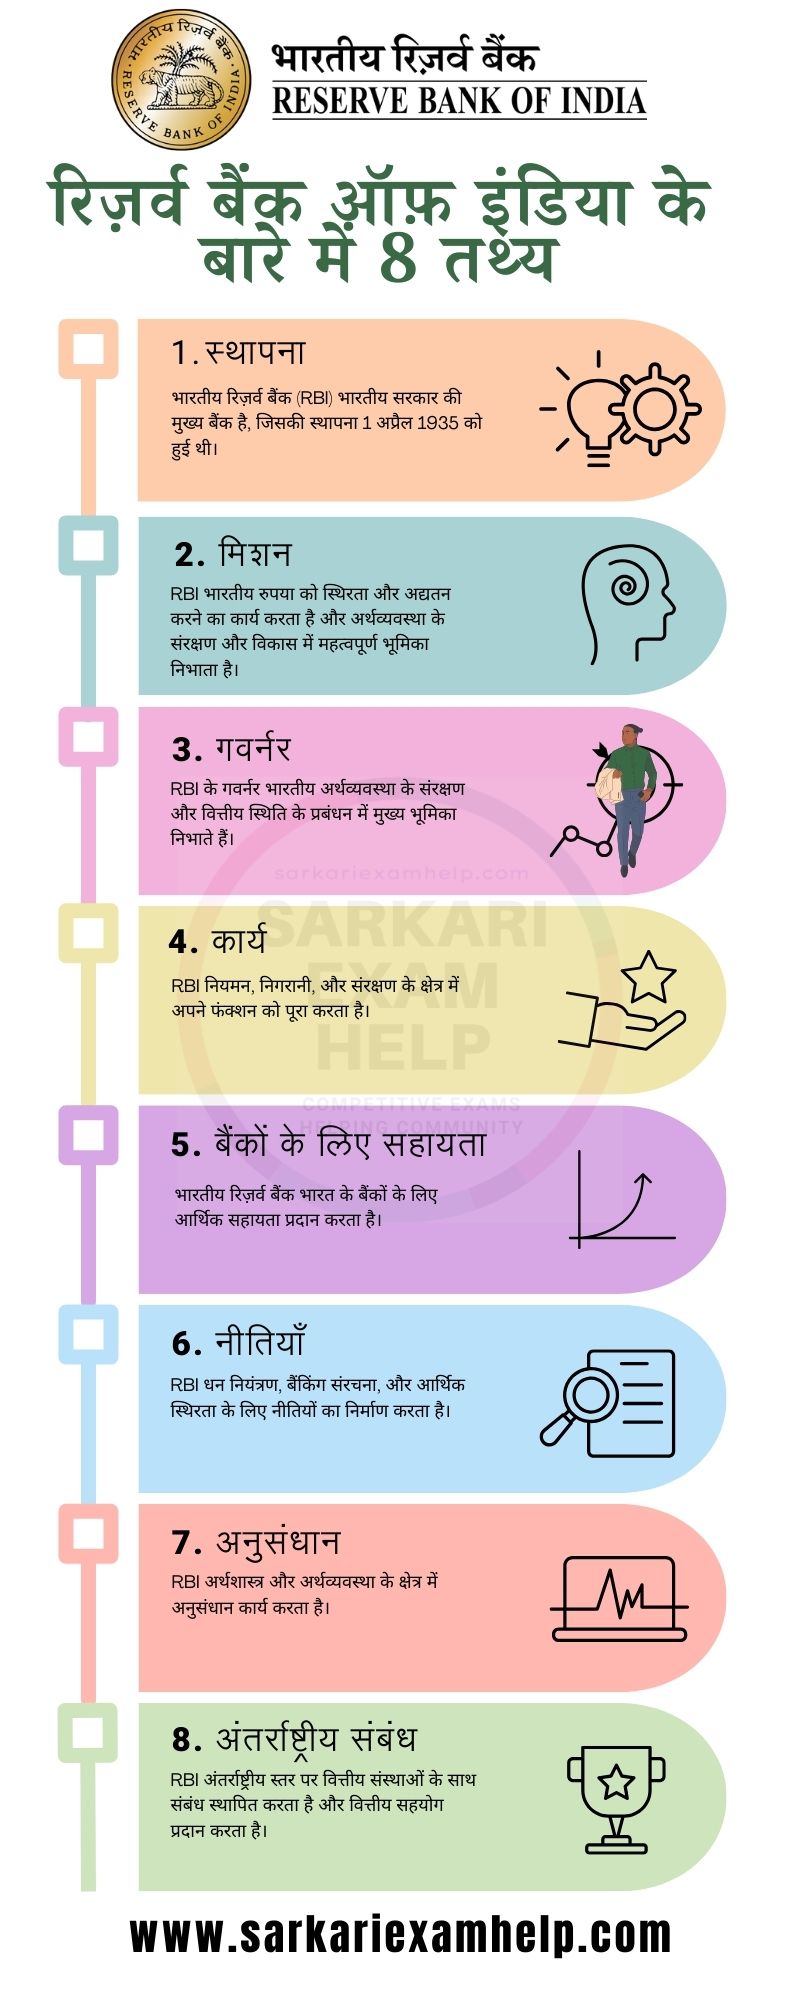 8 Facts Of RBI in Hindi